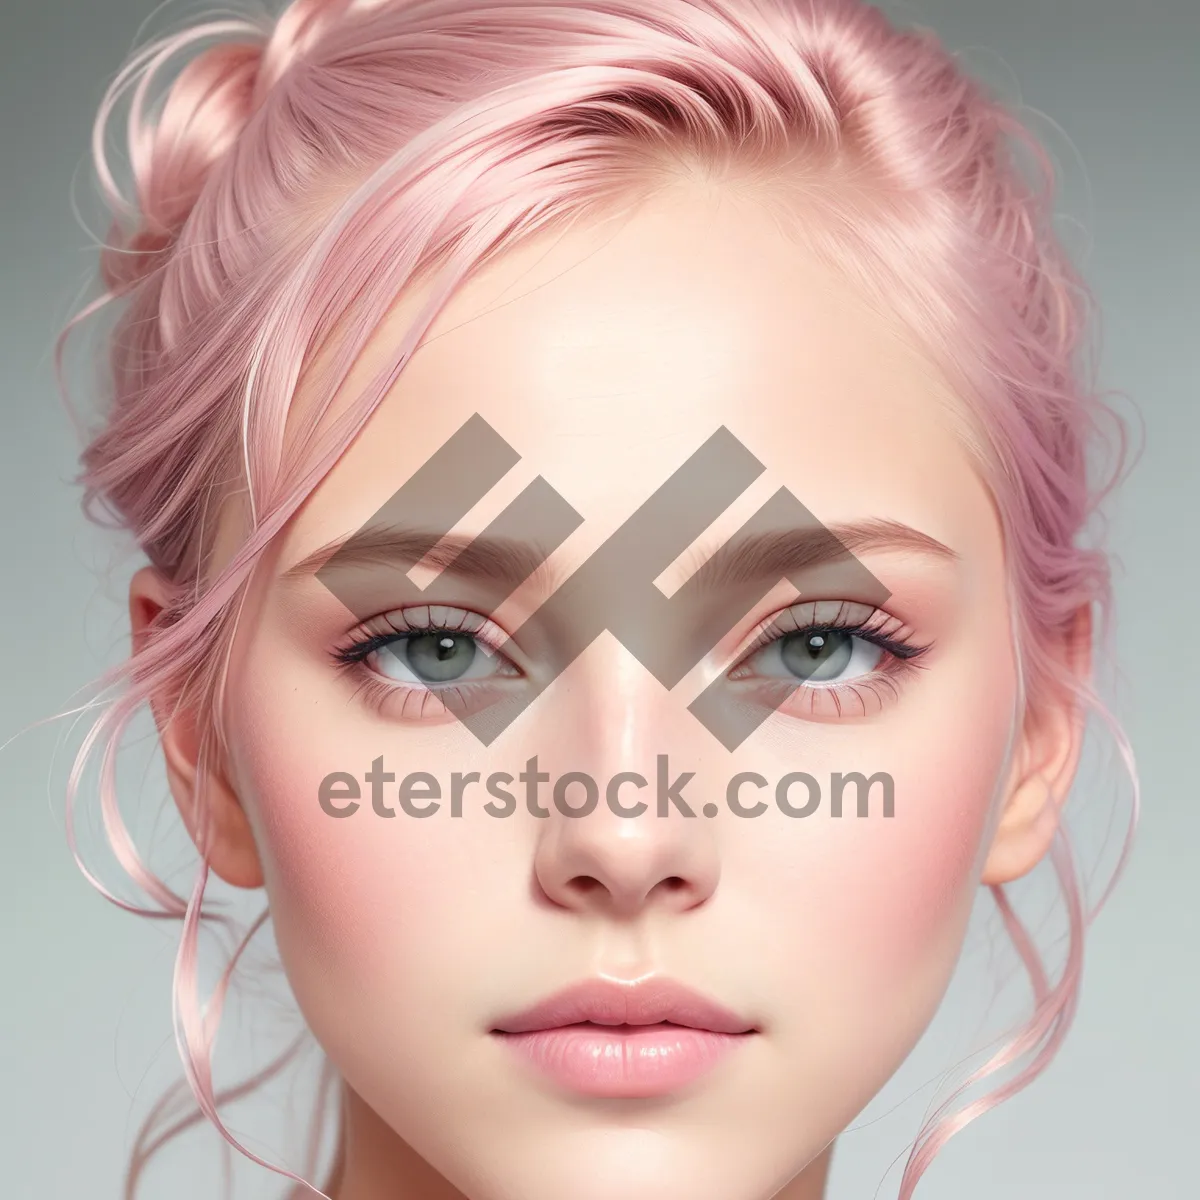 Picture of Blond Beauty in Glamorous Makeup and Wig